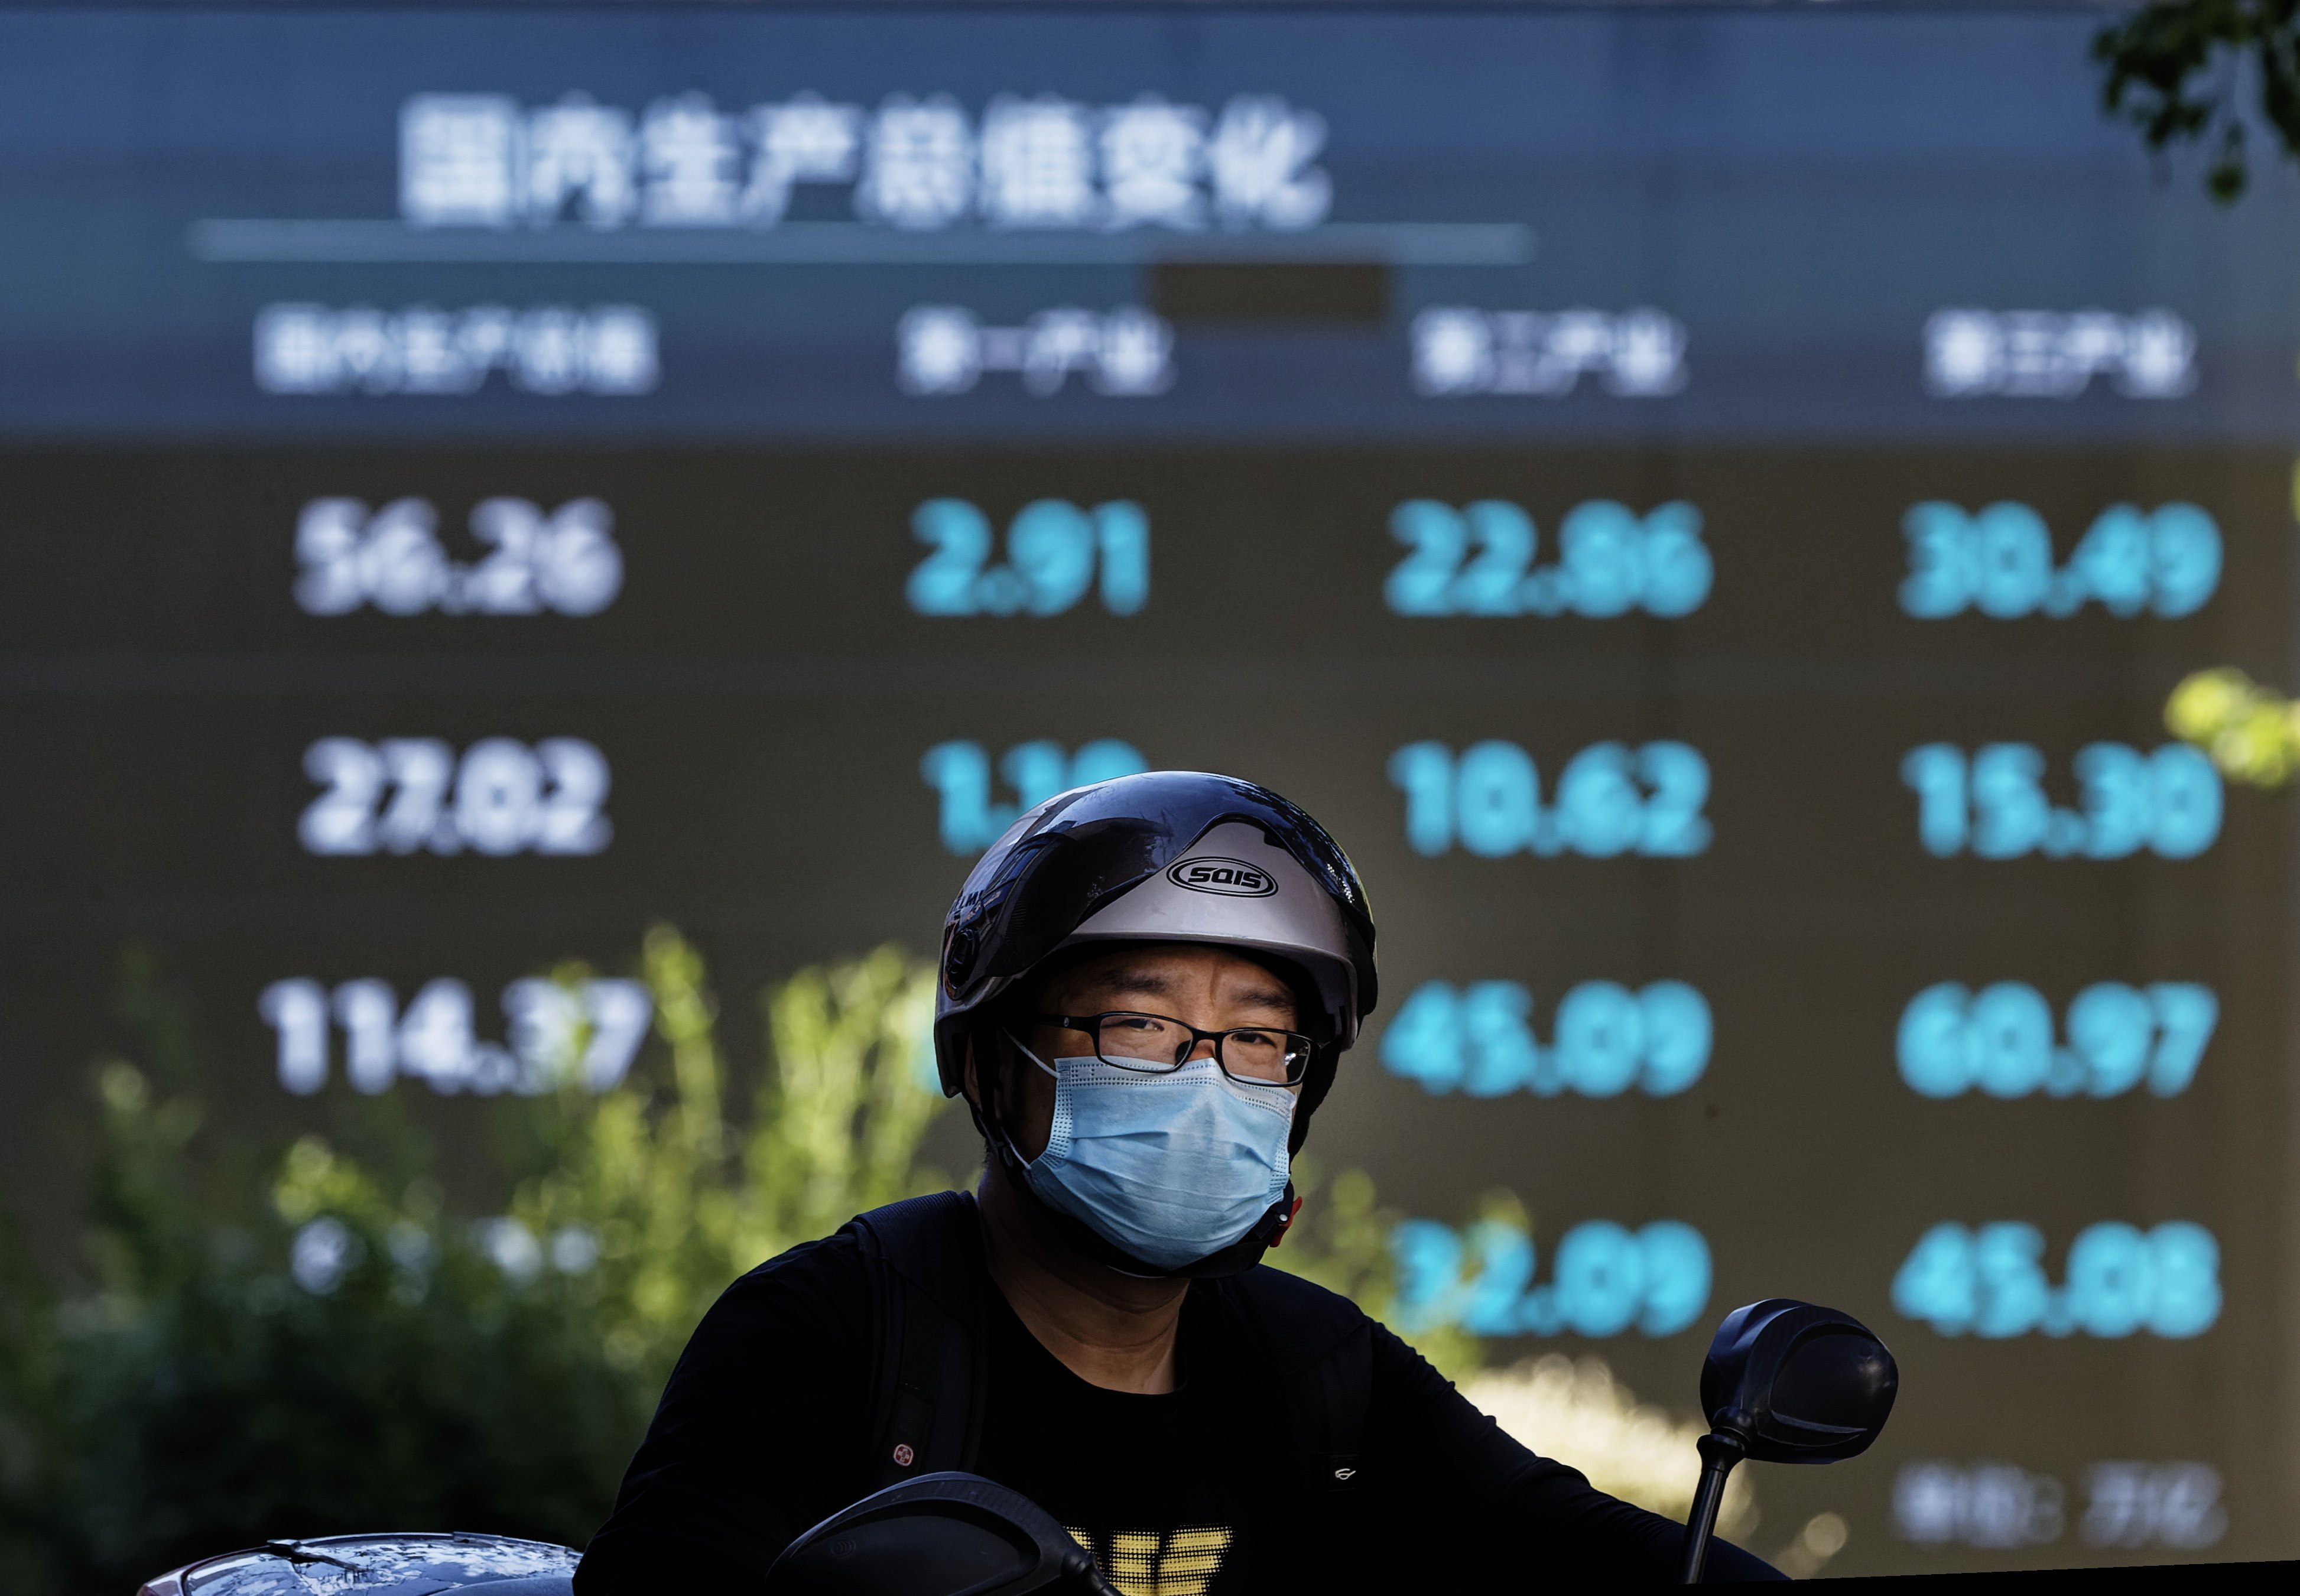 Stock prices are displayed on an electronic board in Shanghai. The performance of Chinese stocks has been affected by many factors, including Covid-19 lockdowns and a housing crisis. Photo: EPA-EFE